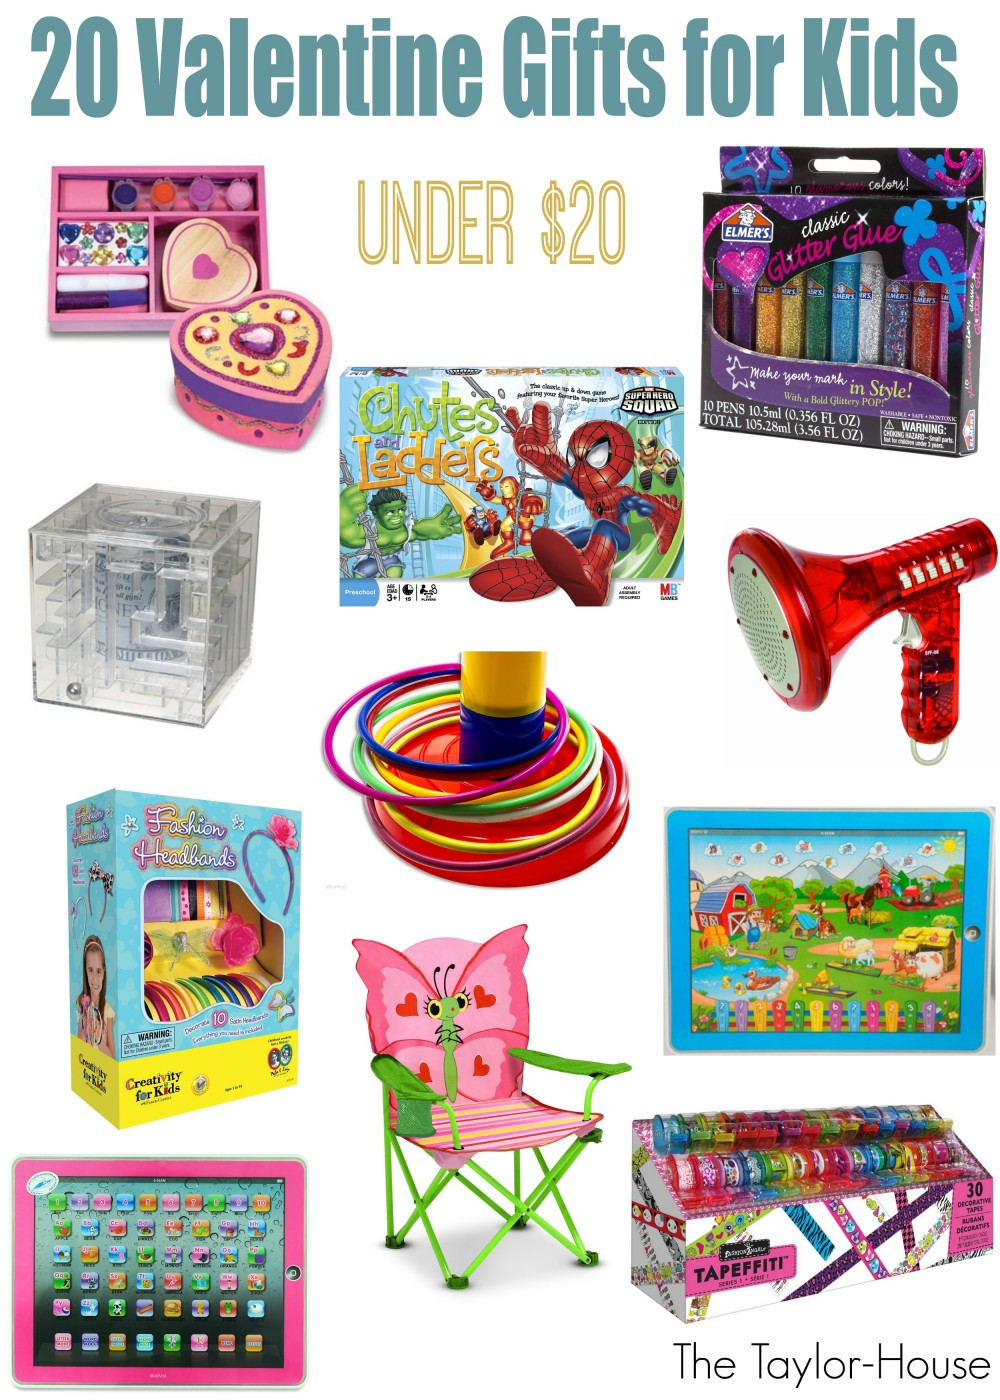 Gift Ideas For Valentines
 Valentine Gift Ideas for Kids